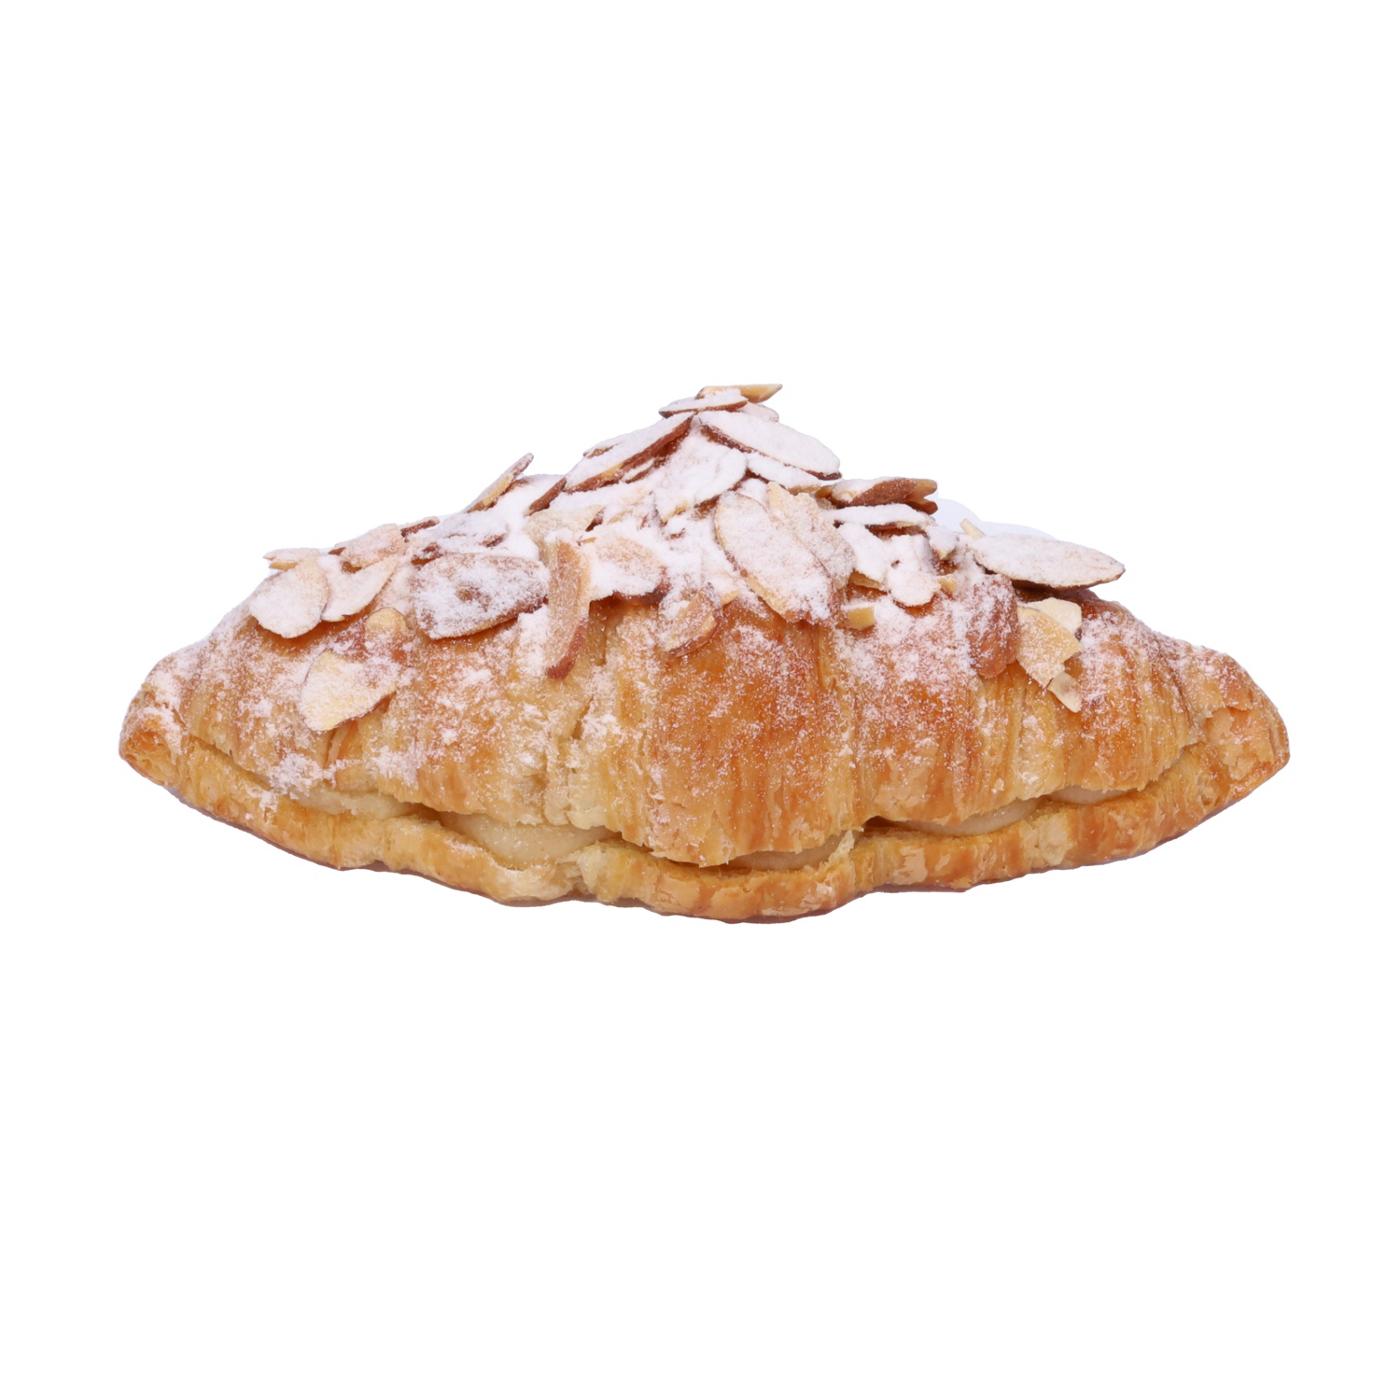 H-E-B Bakery Large Almond Croissant; image 3 of 3